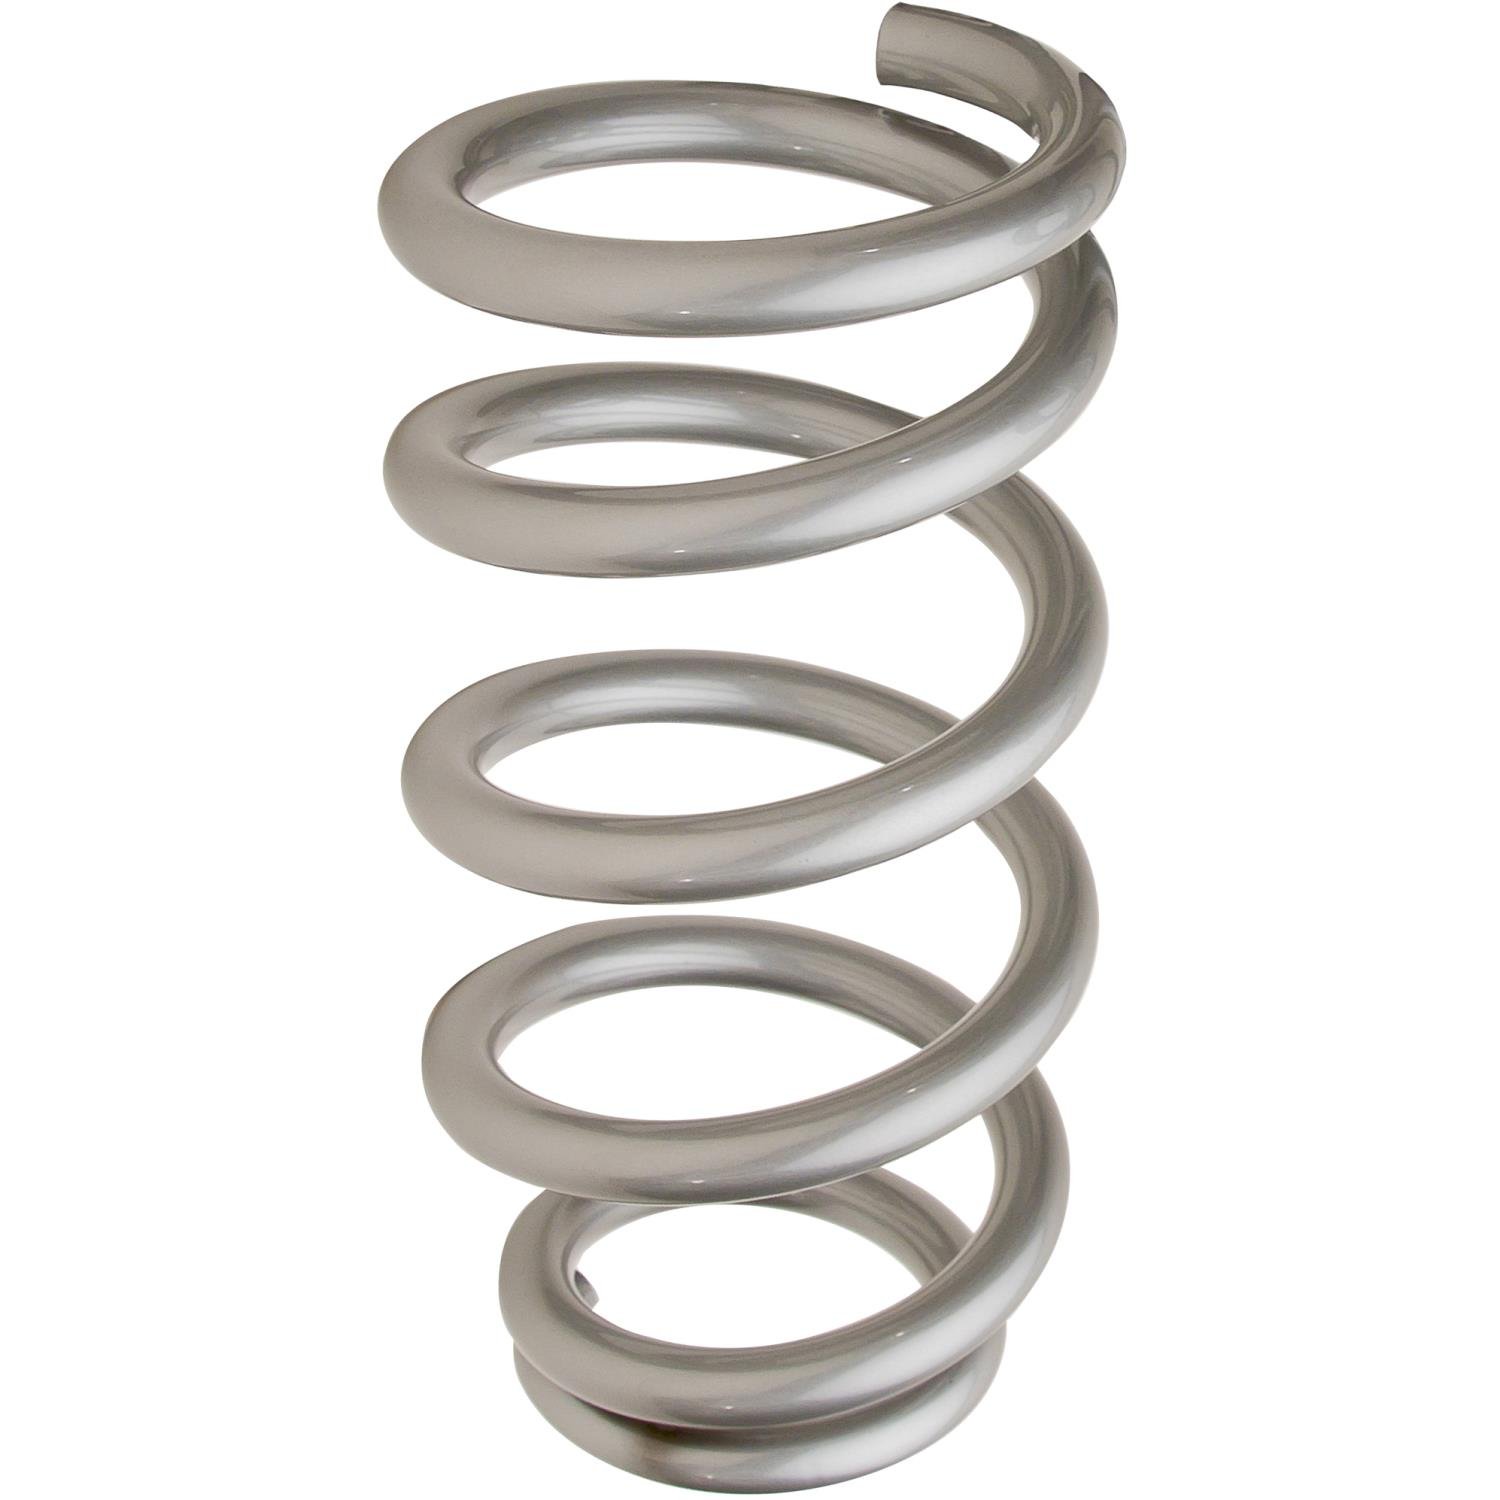 GM Style Flat & Ground High-Tensile Spring 10"